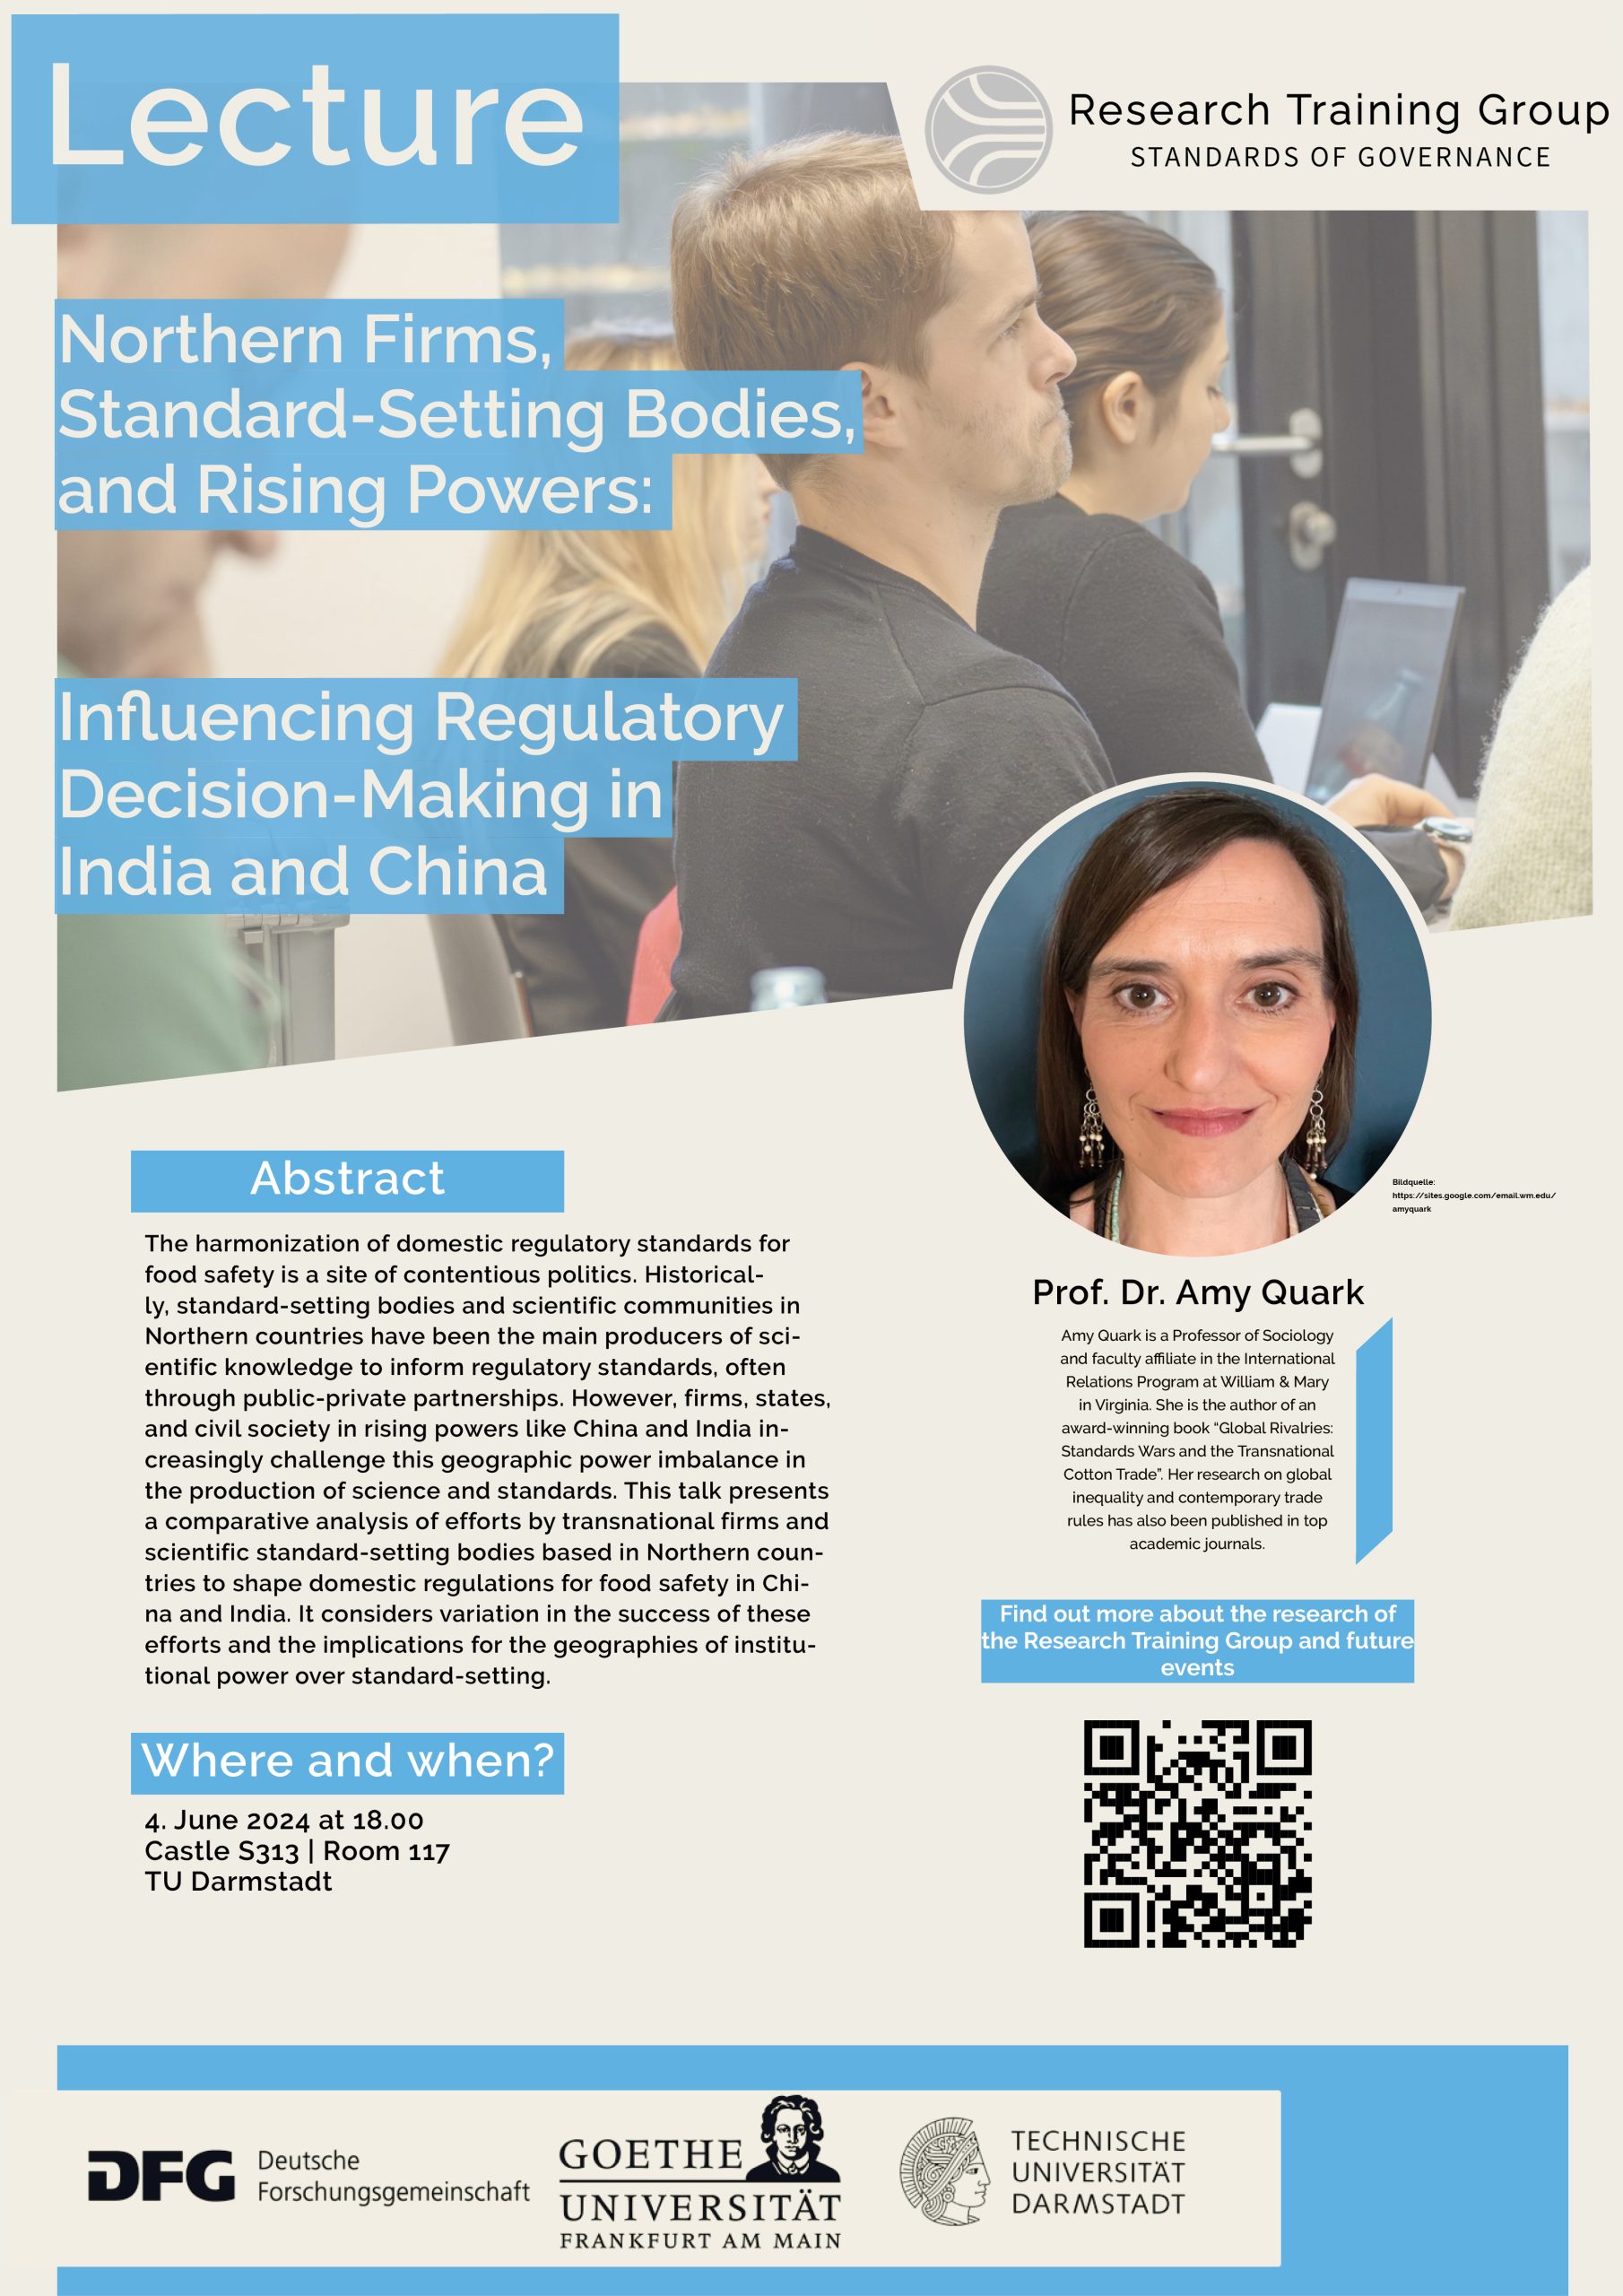 Lecture: Northern Firms, Standard-Setting Bodies, and Rising Powers: Influencing Regulatory Decision-Making in India and China